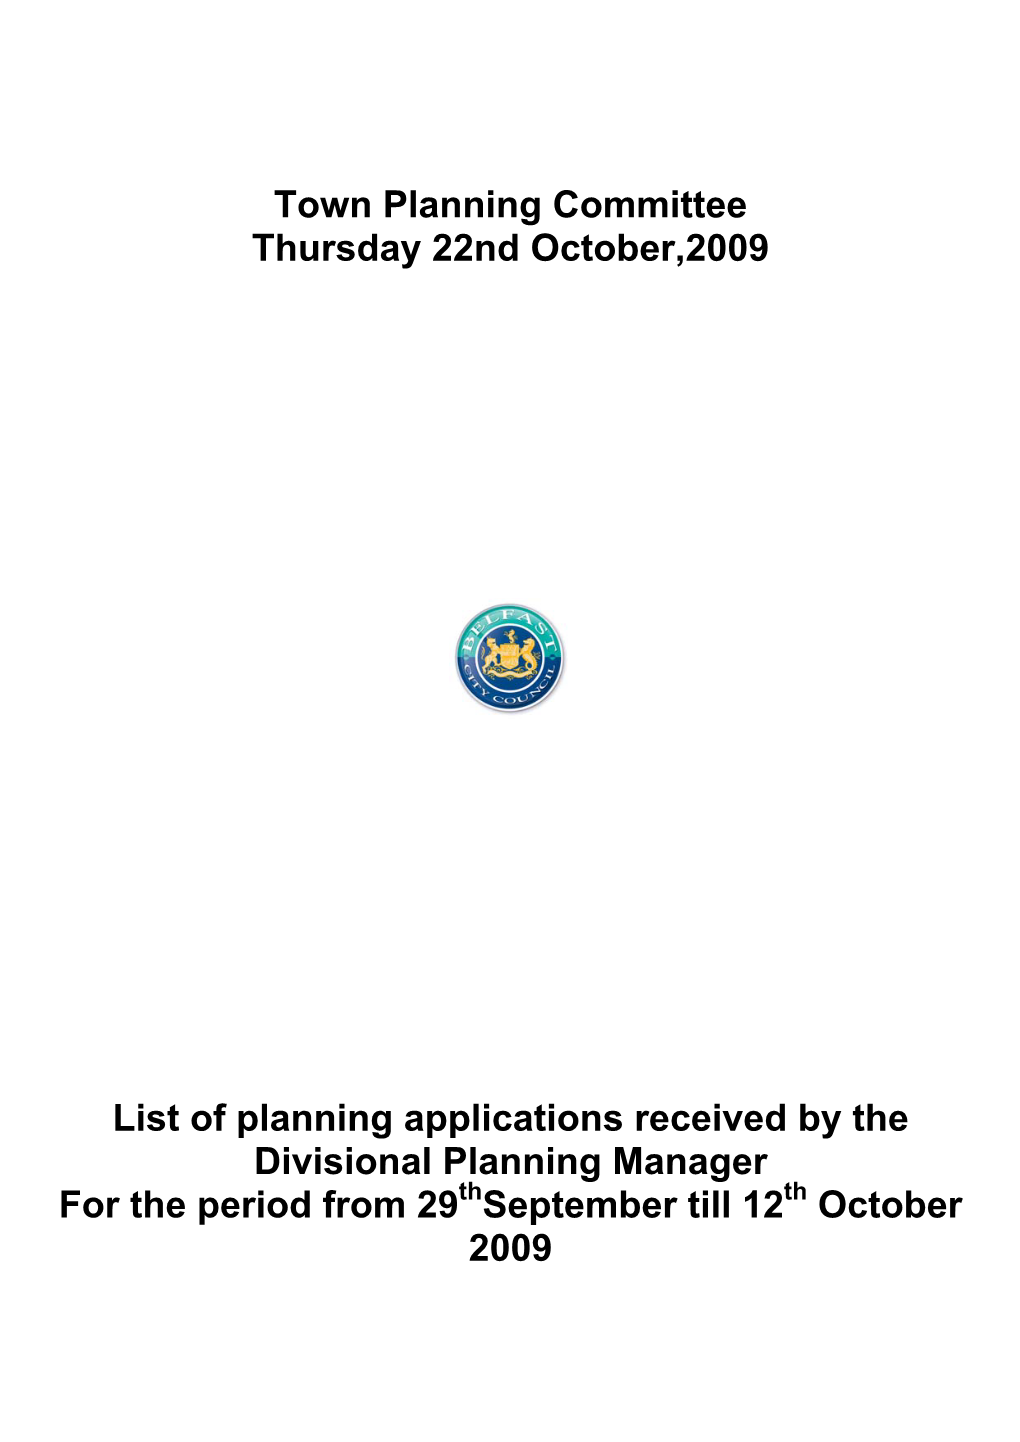 Town Planning Committee Thursday 22Nd October,2009